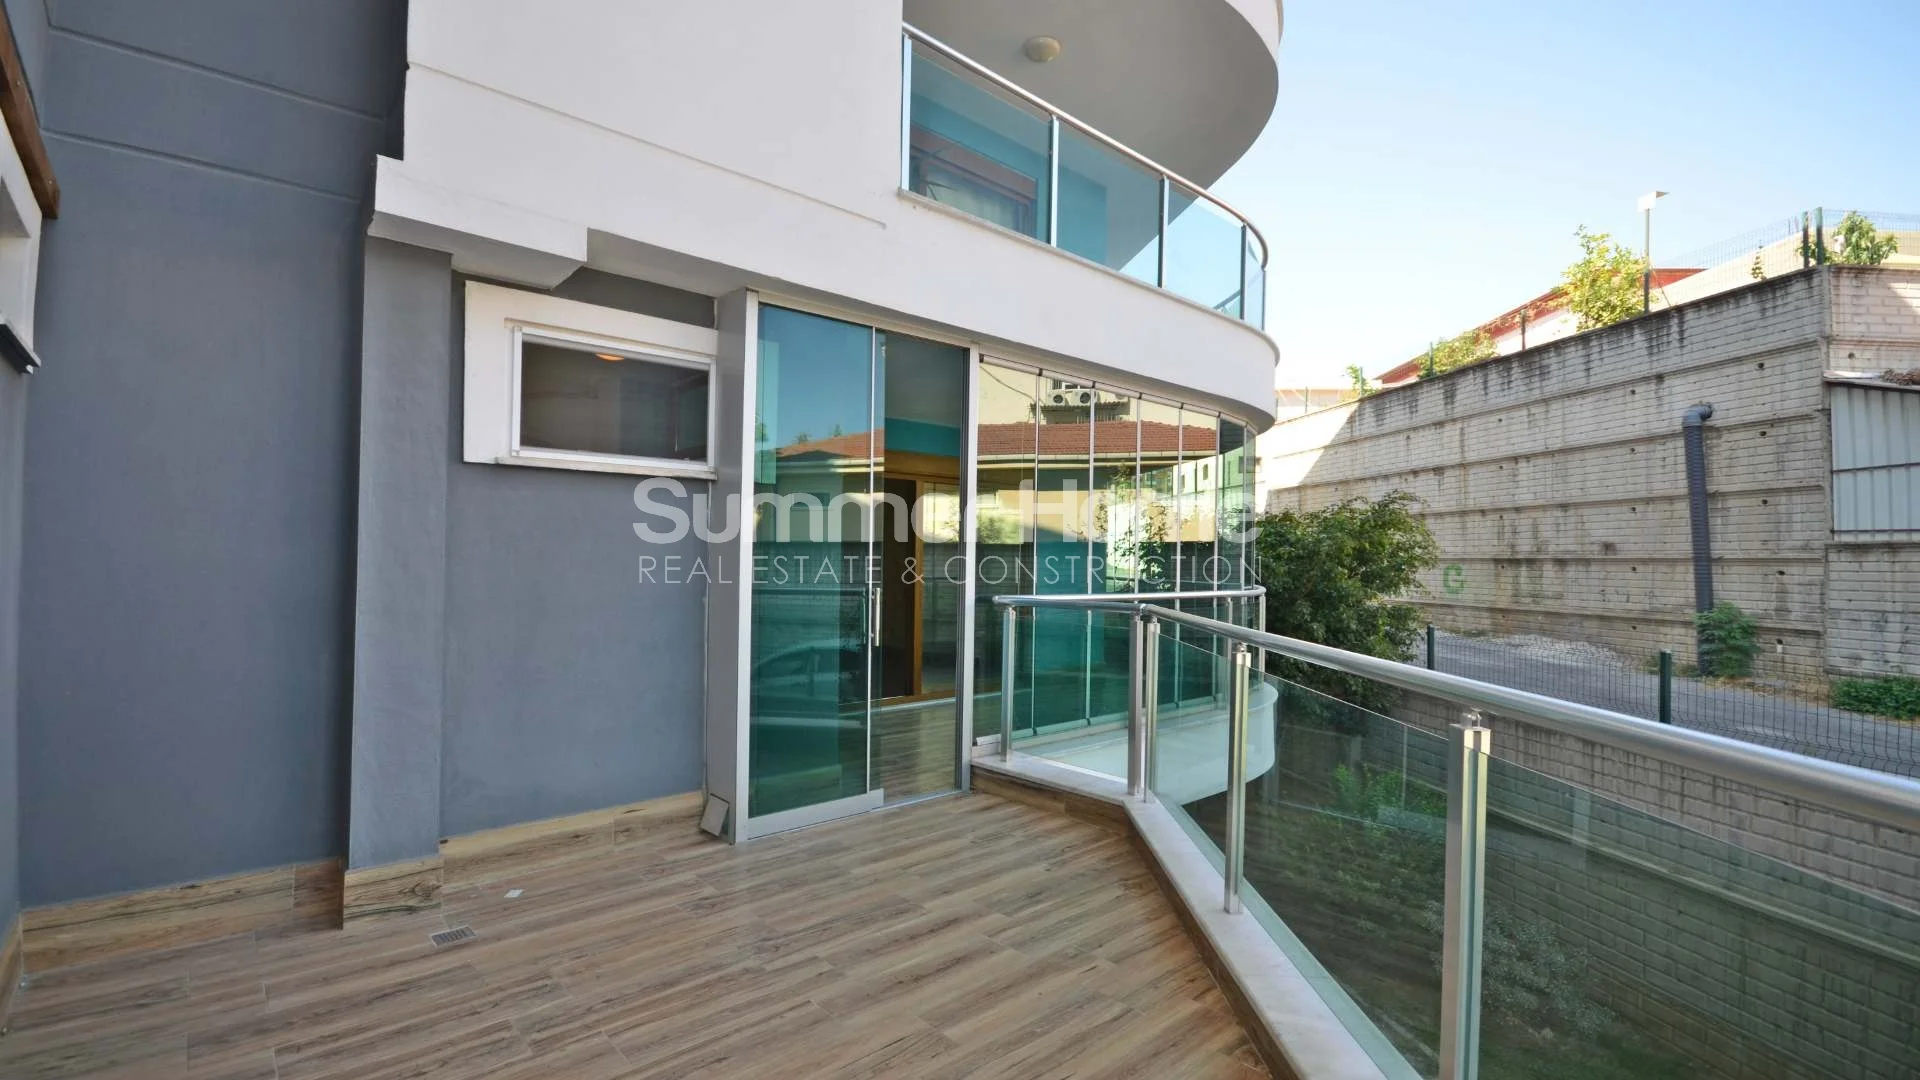 For sale Apartment Alanya Hasbahce Interior - 14